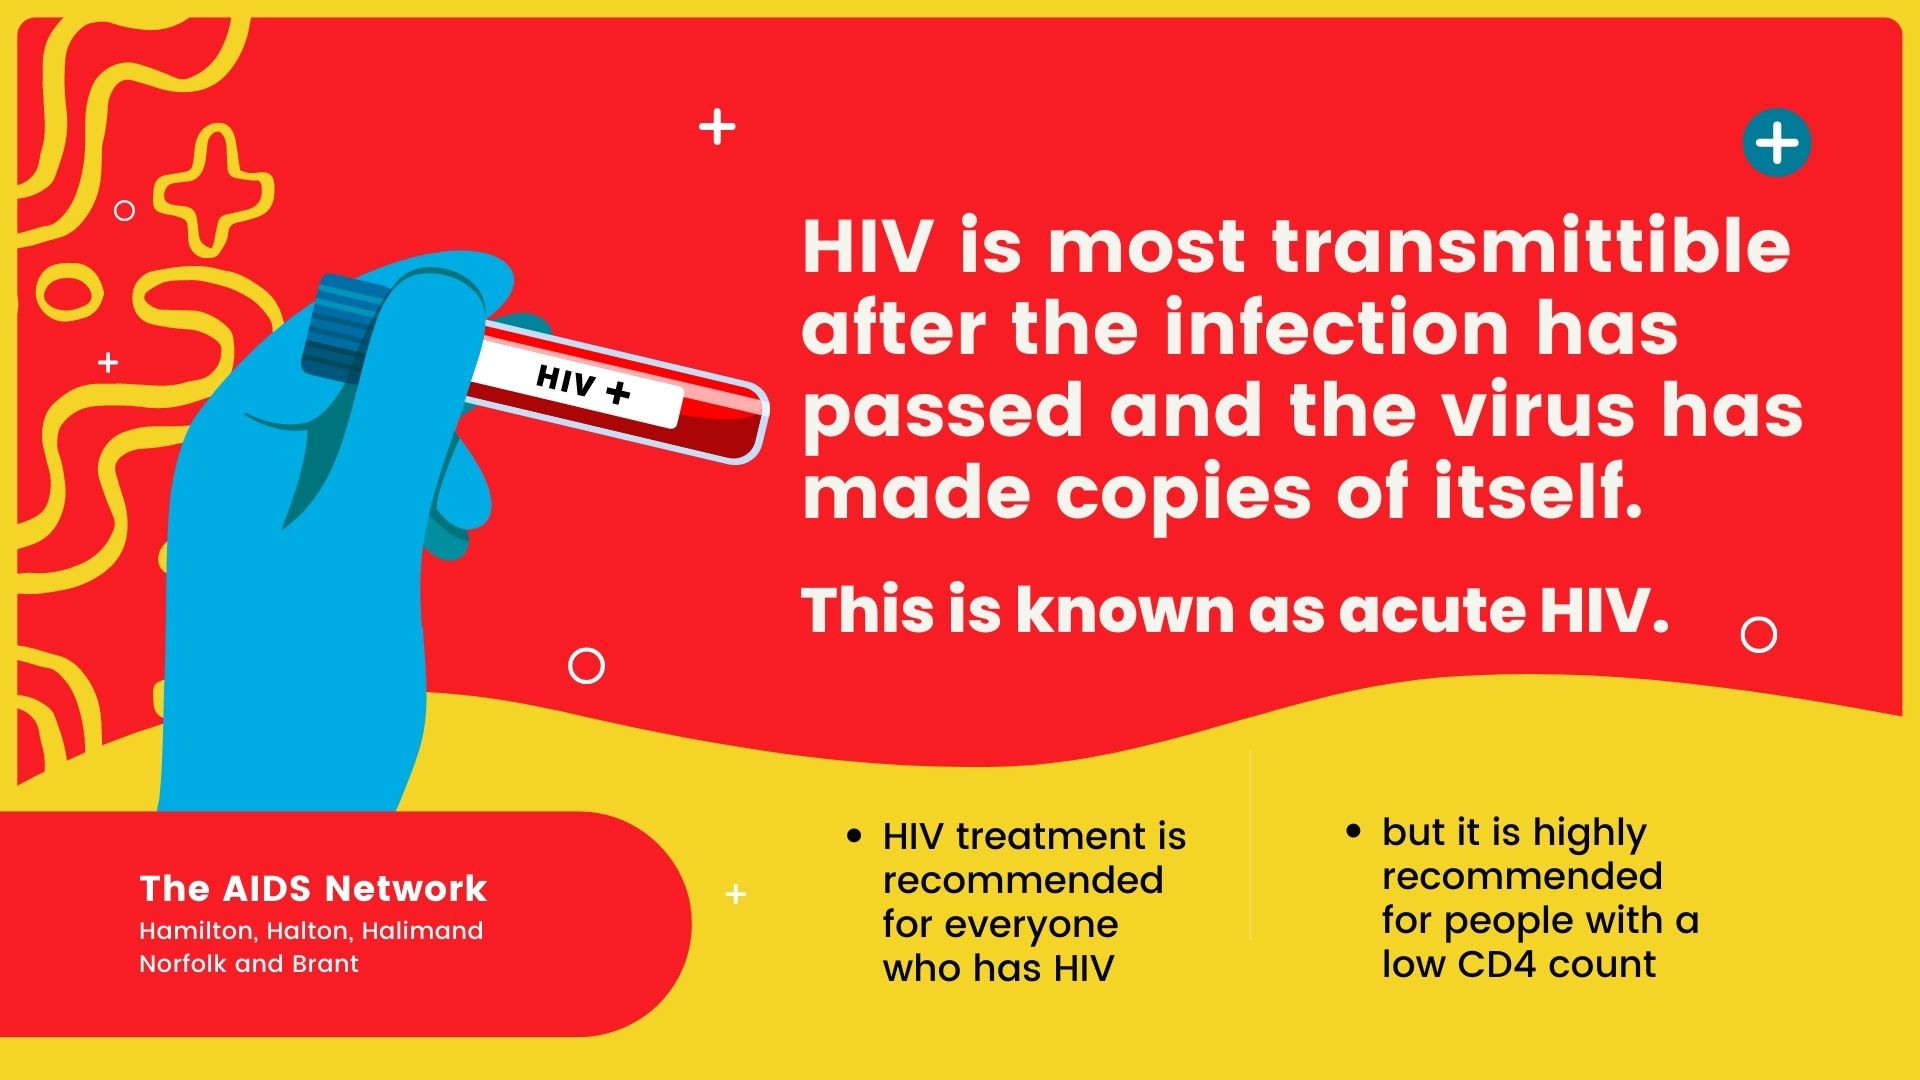 What is acute HIV?